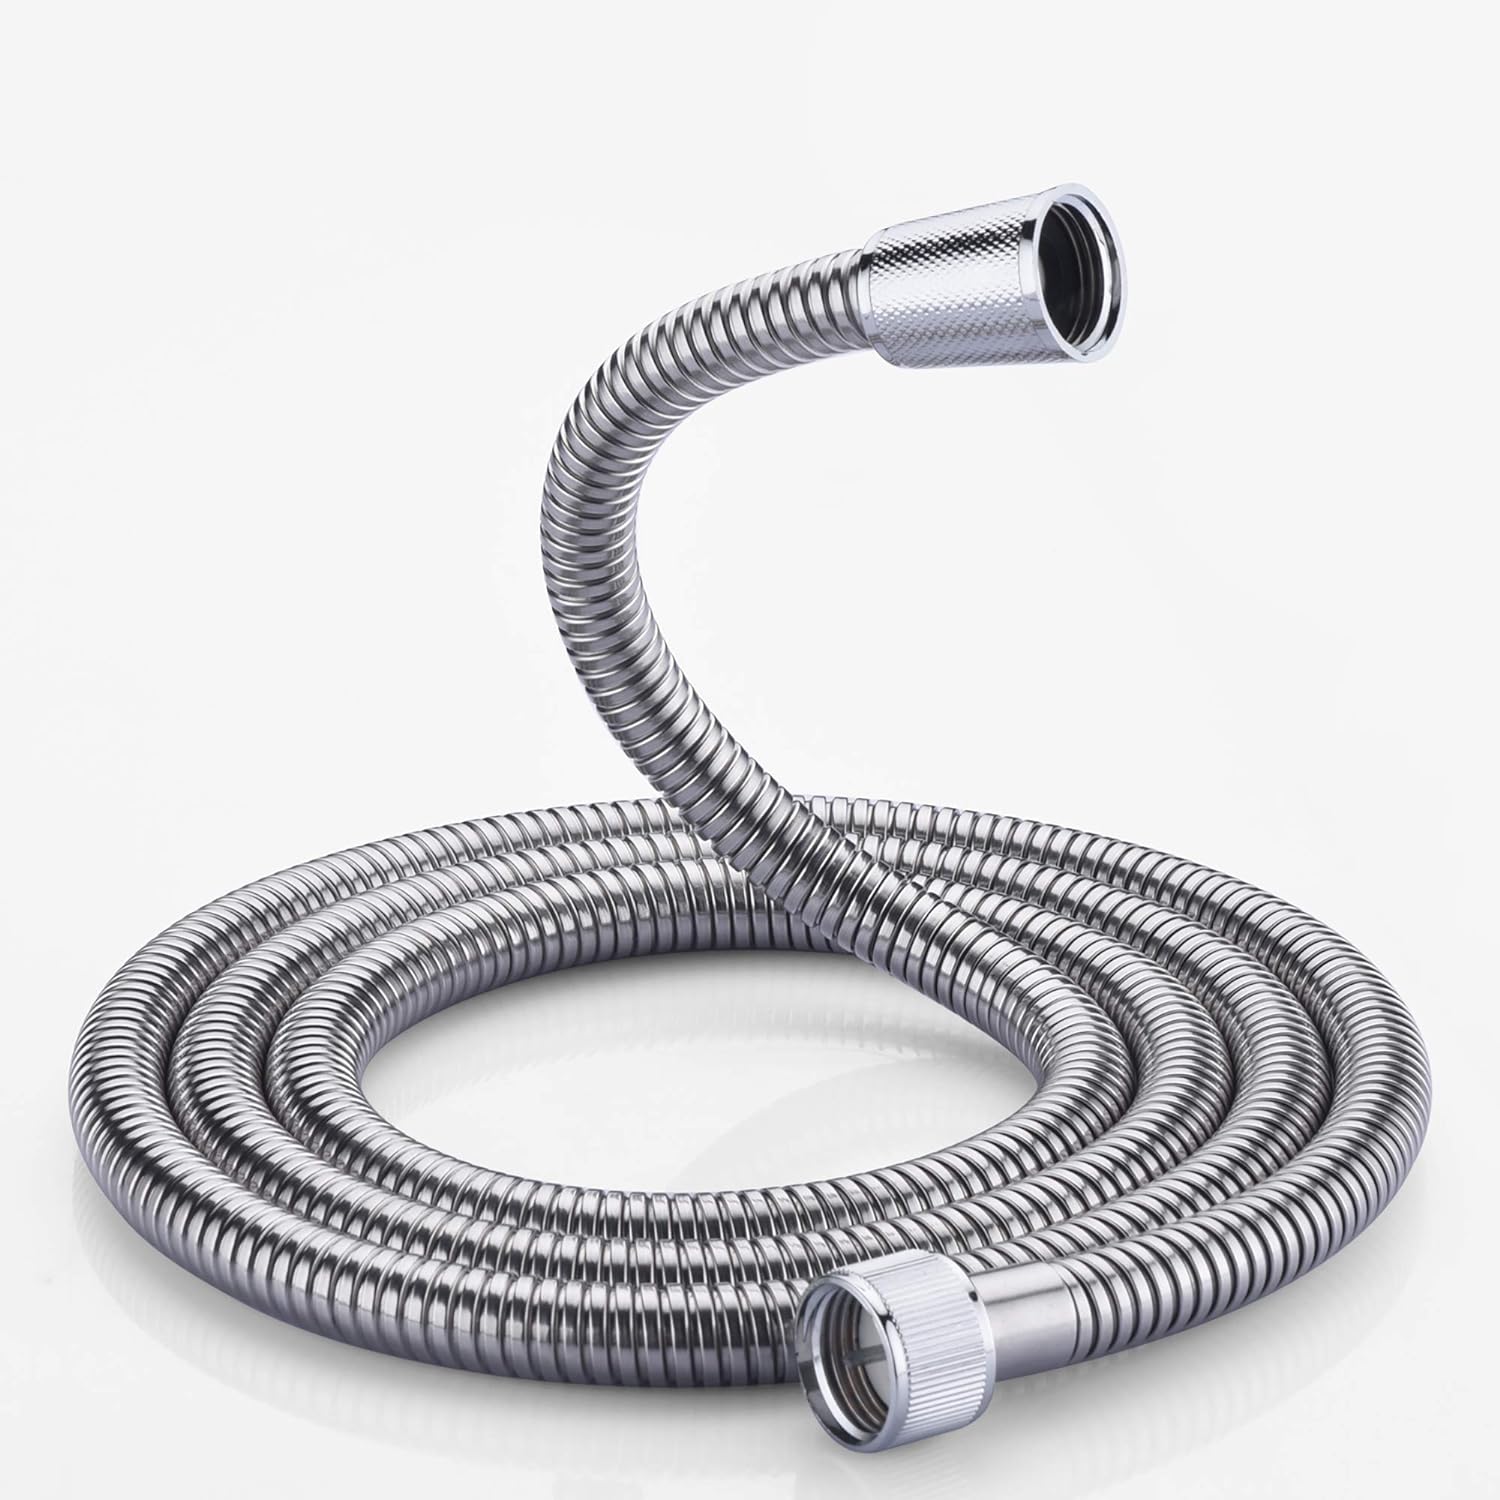 Shower Hose Stainless Steel: Extra Long Handheld Shower Head Hose Extension Replacement, Shower Hose Attachment For Shower Head Hose 6 Feet, Brushed Nickel